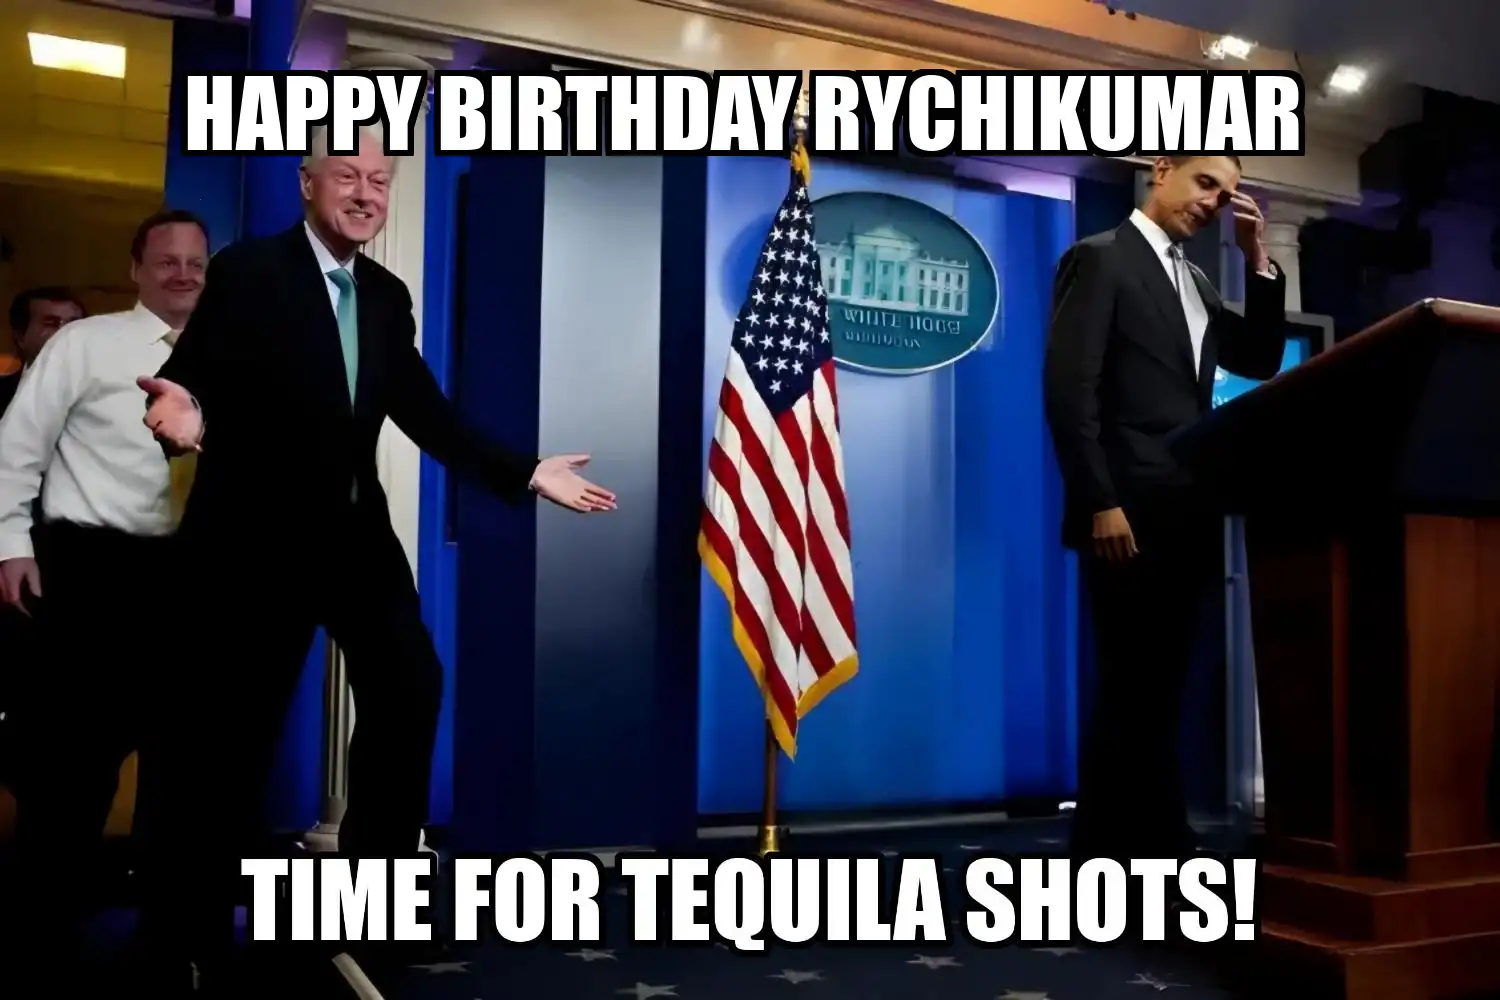 Happy Birthday Rychikumar Time For Tequila Shots Memes